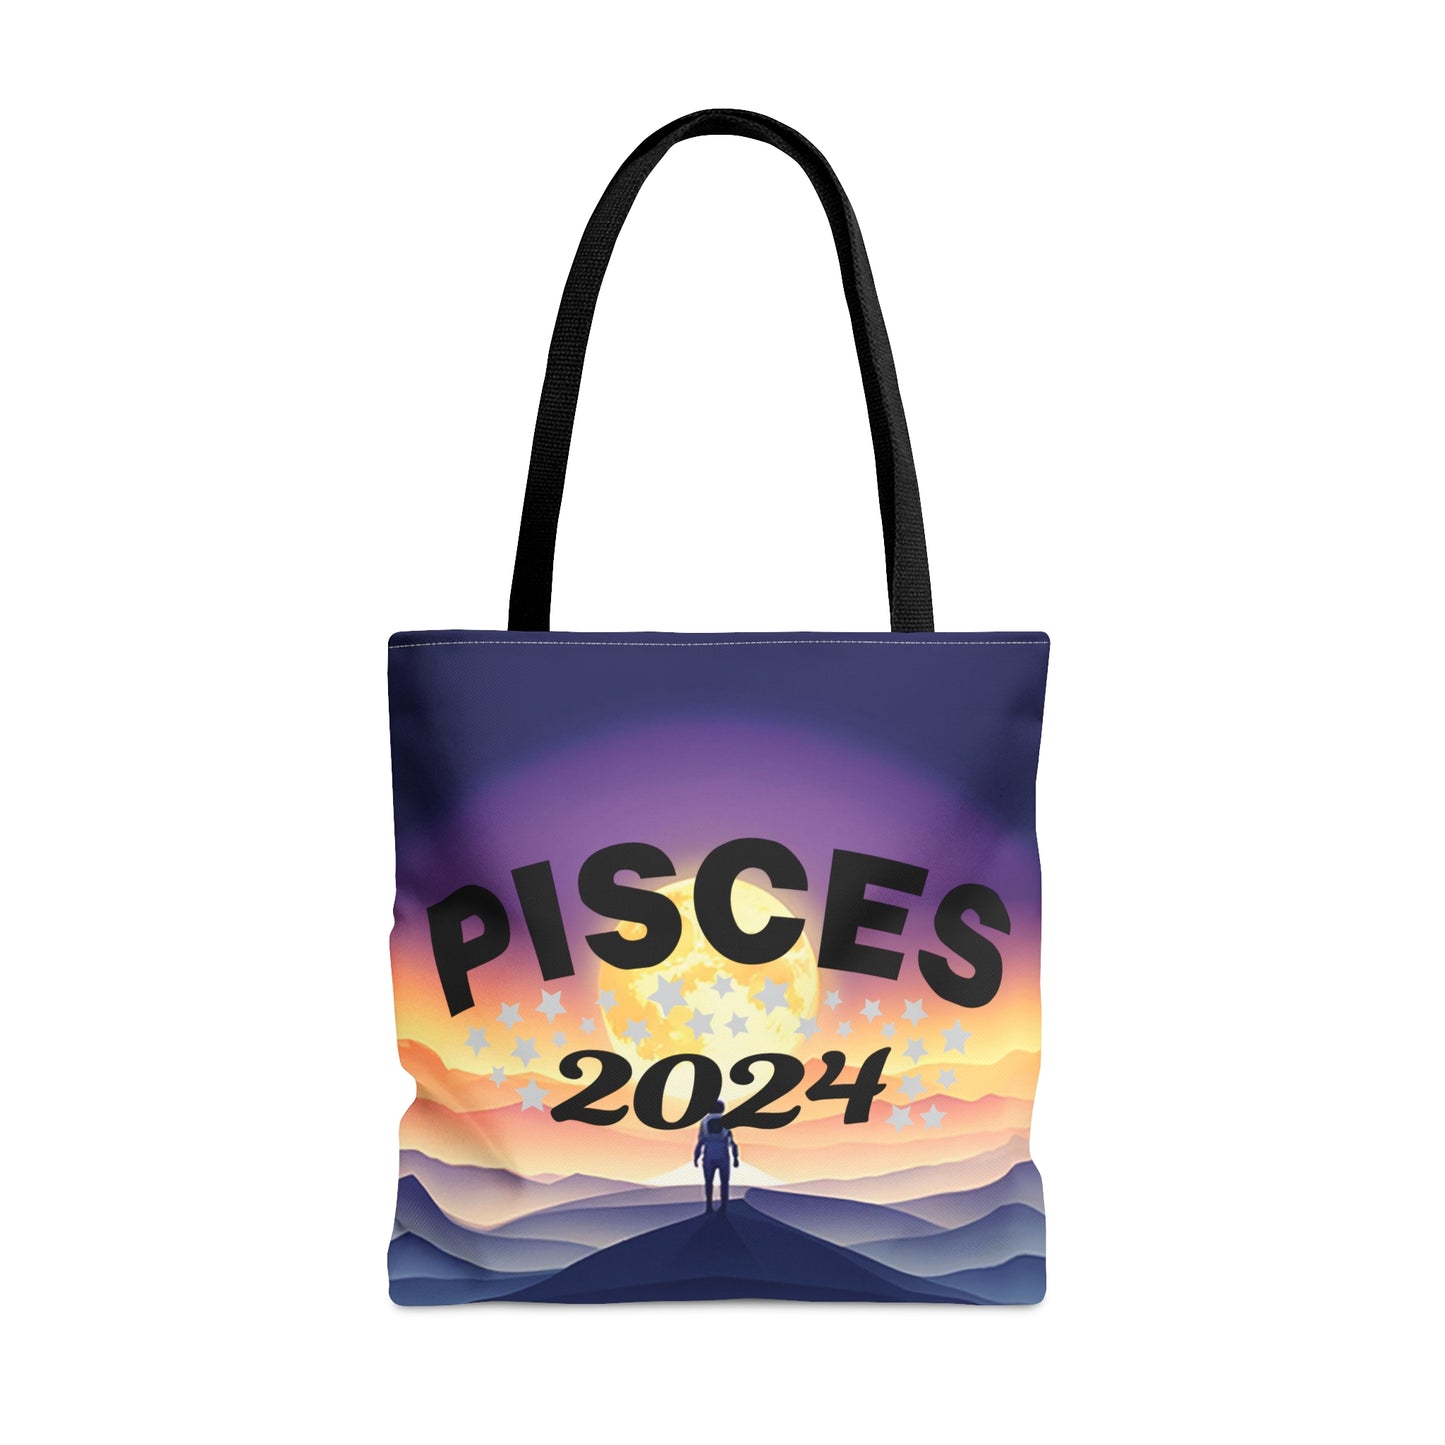 Pisces 2024 Tote Bag